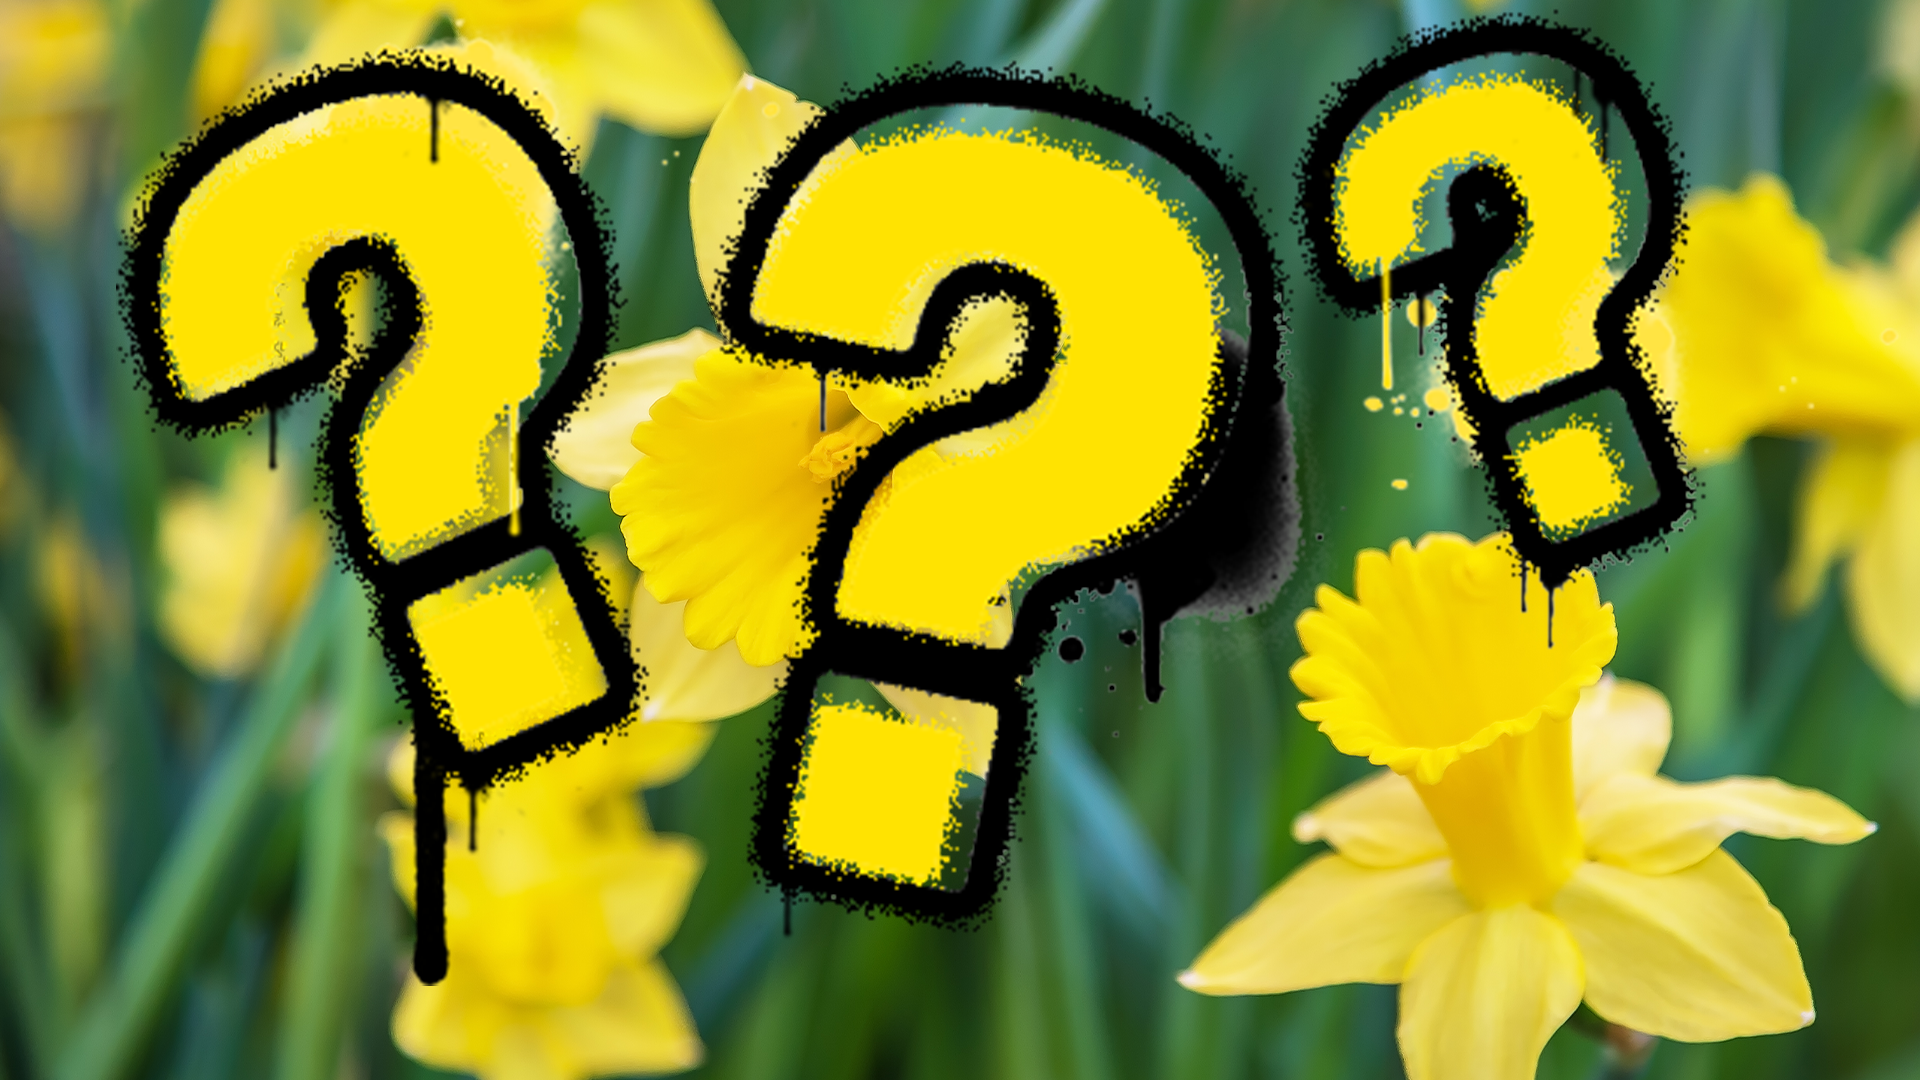 Some daffodils and question marks